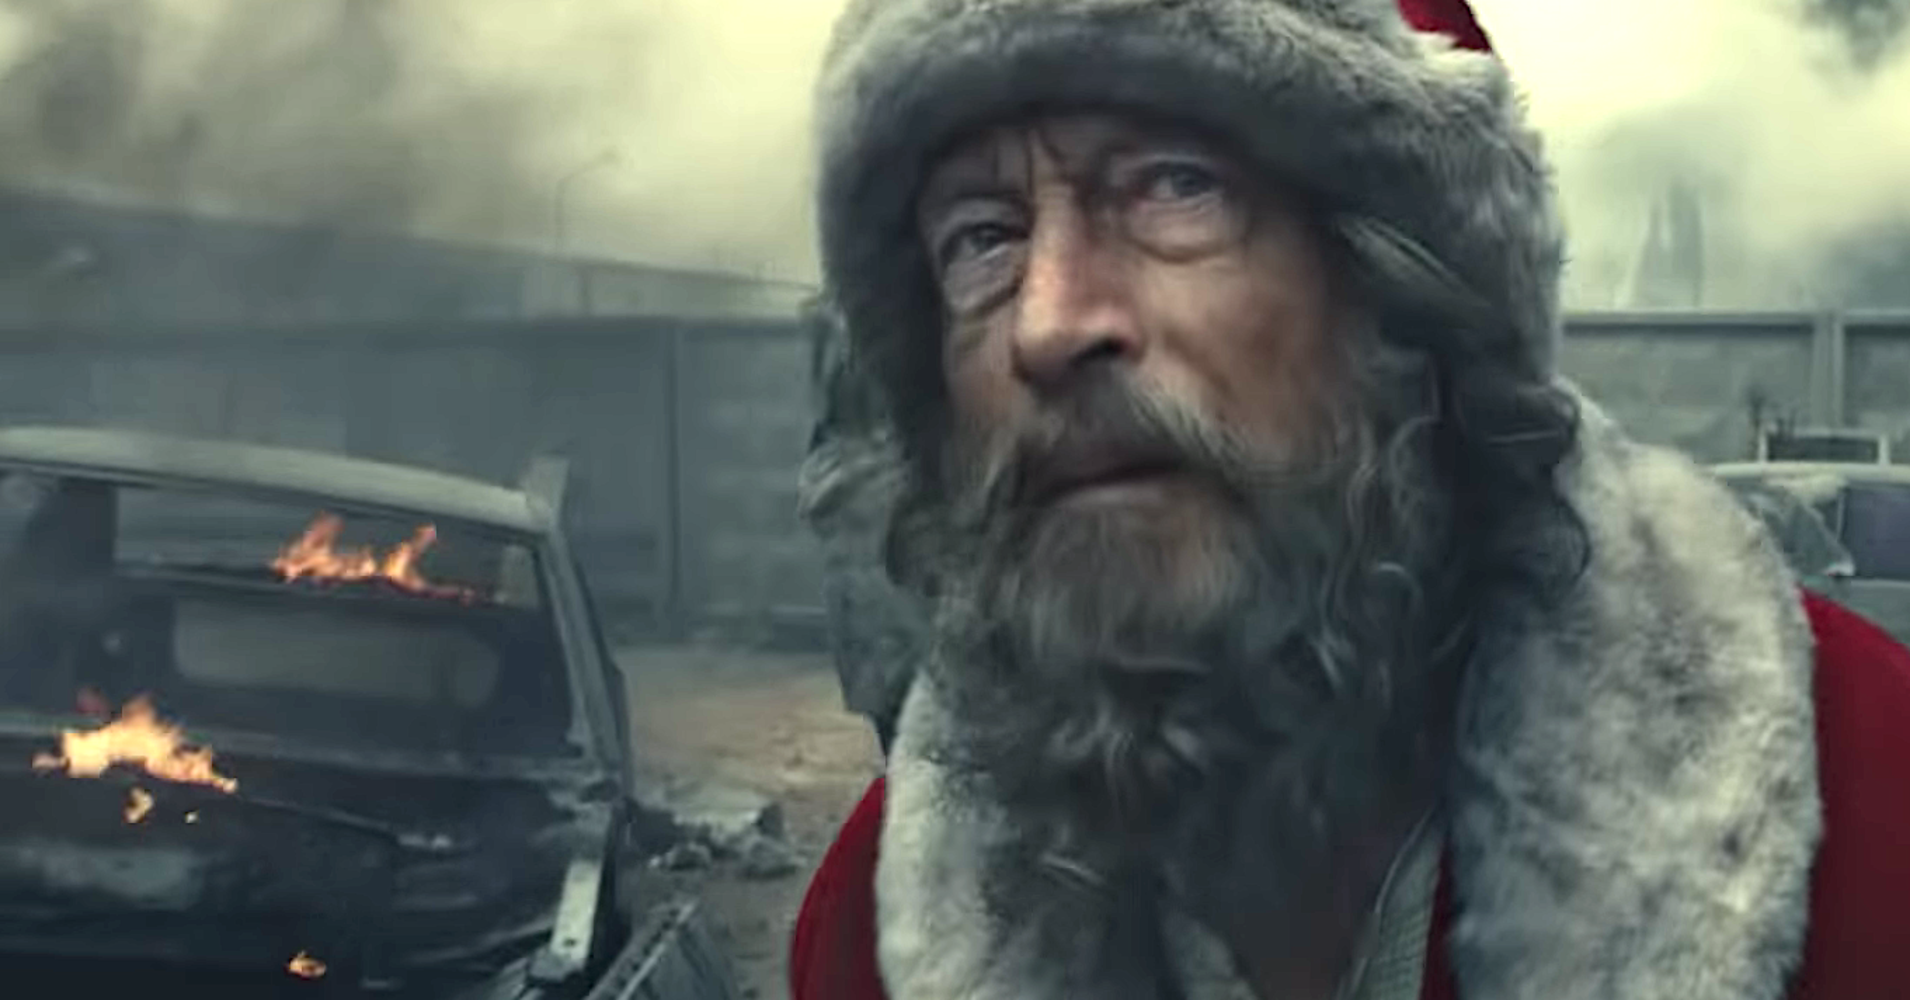  Harrowing Red Cross Holiday Ad Shows Santa Searching For Missing Girl In War Zone